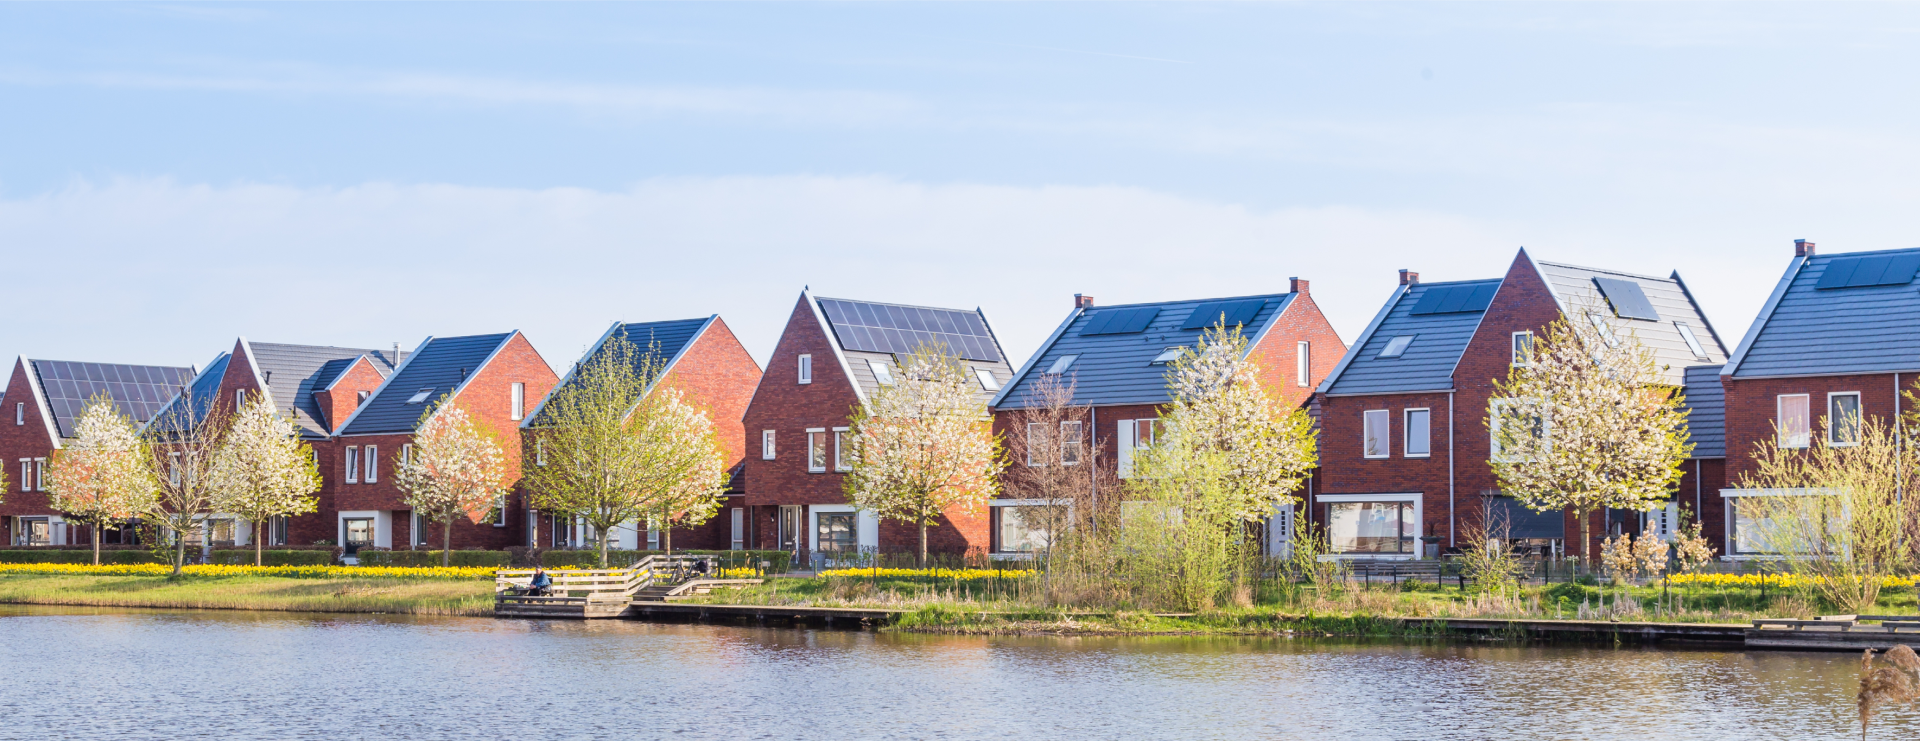 Eco-friendly homes with solar panels in a newly built dutch neighbourhood